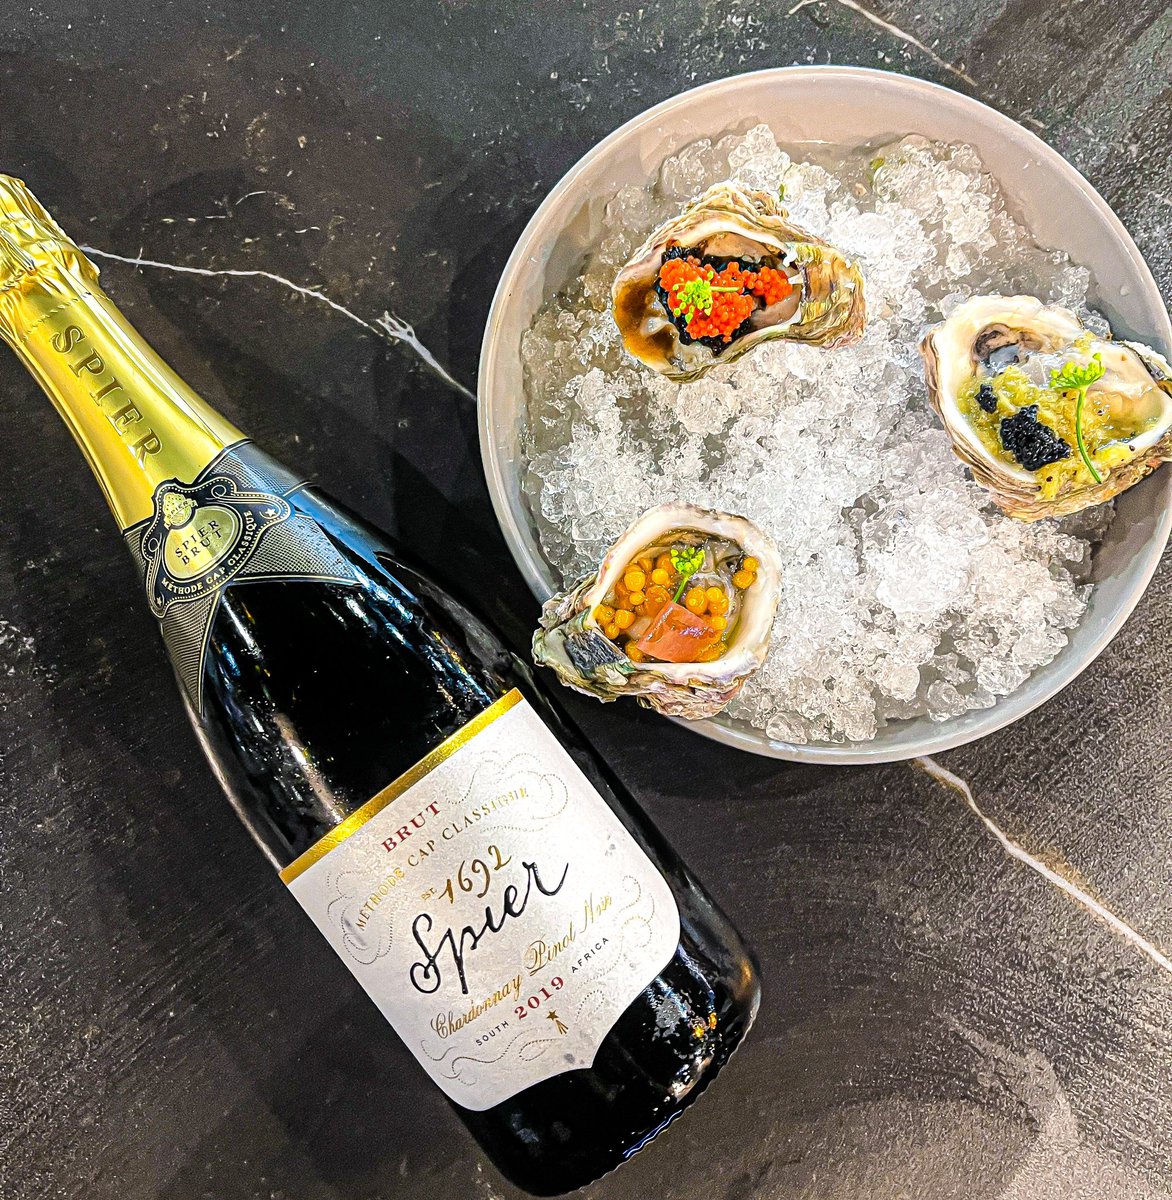 GLAMFOODIE OYSTERS & MCC MASTERCLASS  Done & Dusted 🥂🦪💫

Thanks to @decorexSA & @SamsungSA for having me. Let’s do it again next year! 

Thanks to our sponsors @SpierWineFarm, @Mandla_MaWine, @BlackMambaFood 

#DECOREXAFRICA #SAMSUNGBESPOKE